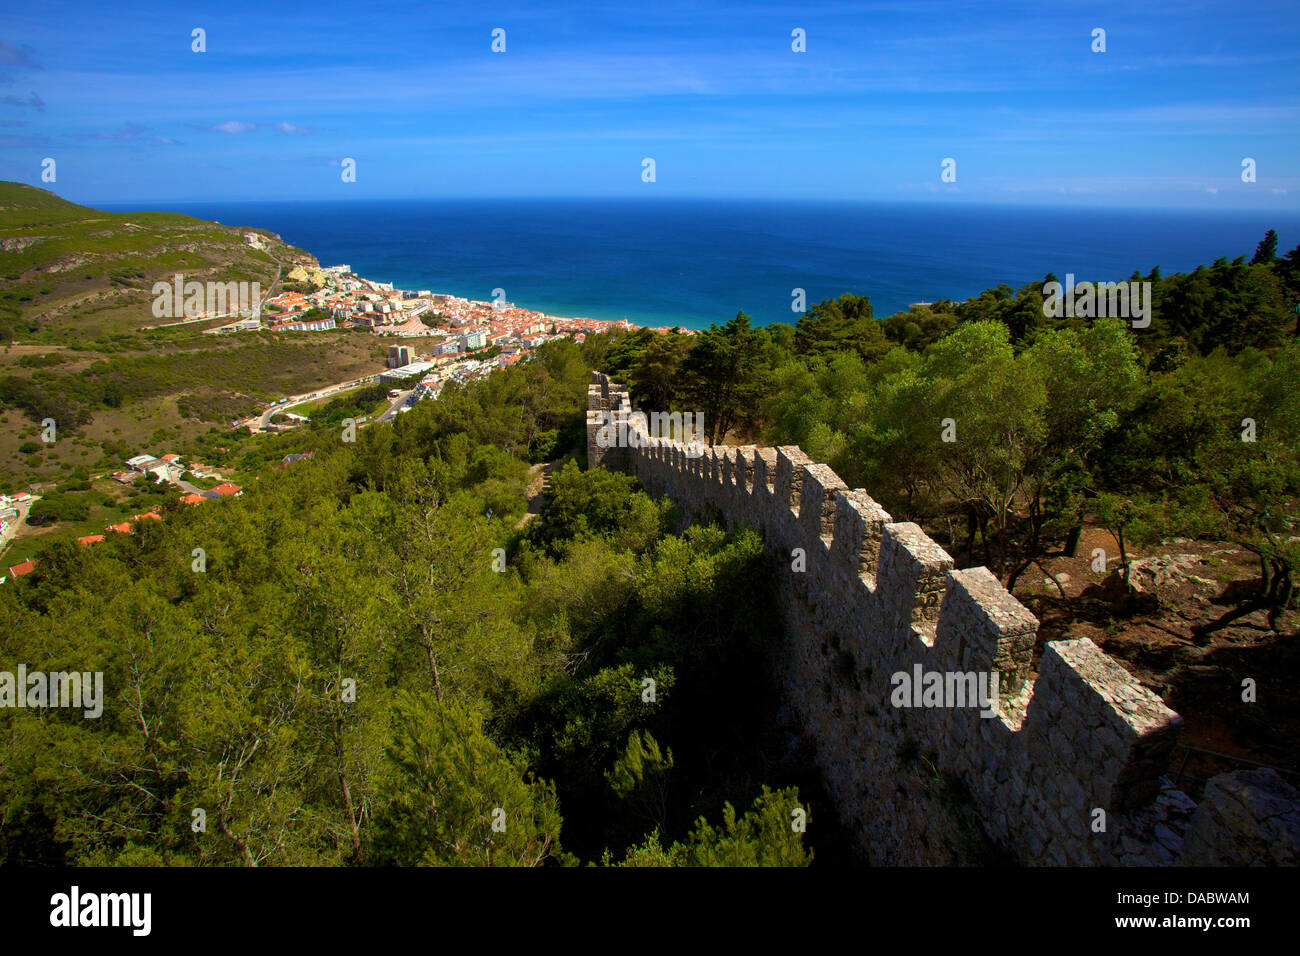 View over Sesimbra from Sesimbra Castle, Sesimbra, Portugal, South West Europe Stock Photo